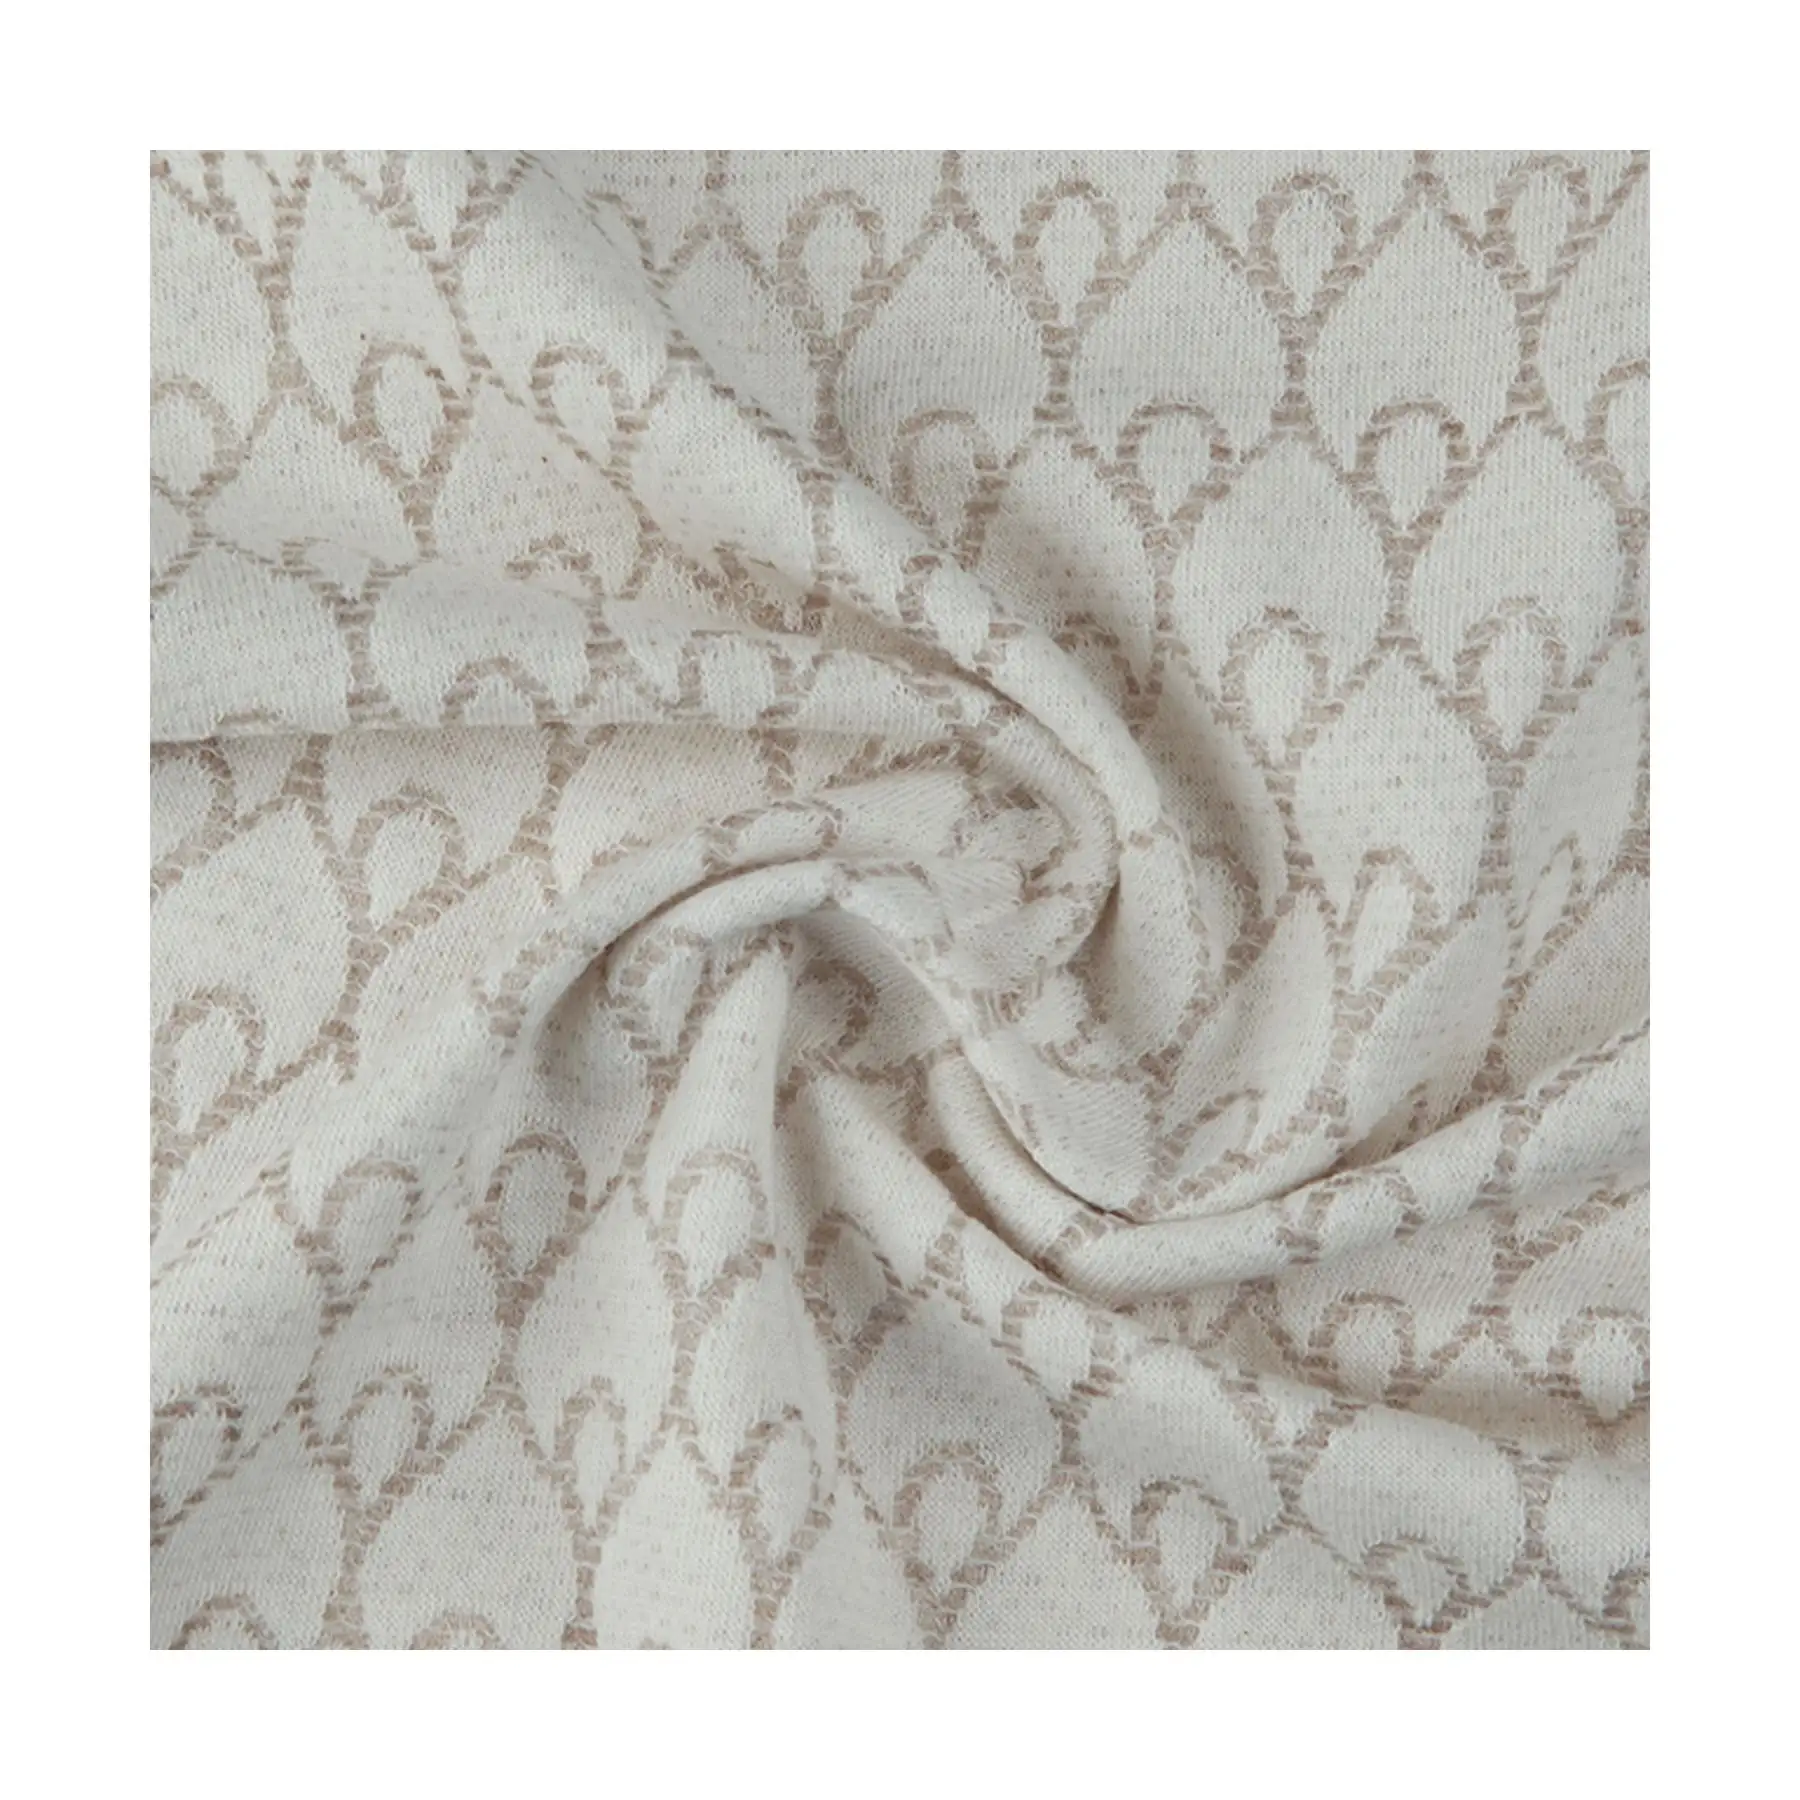 Luxurious Victorian Jacquard Design - Made In Italy Elegant Fabric For Dresses   T-Shirts - Timeless Style With Quality